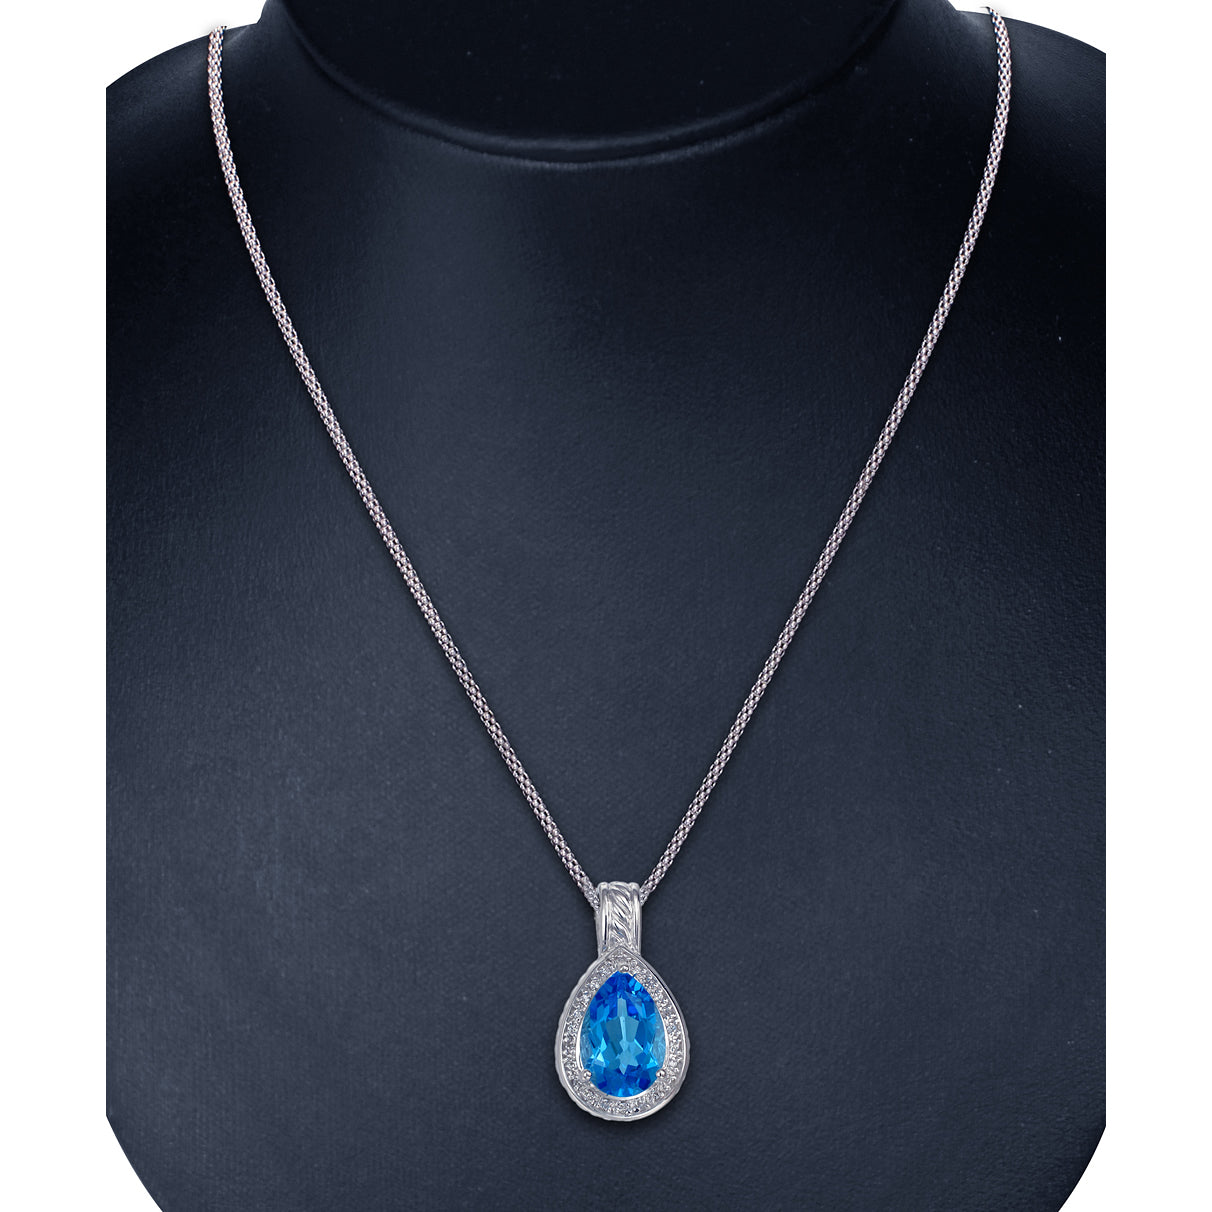 5 cttw Swiss Blue Topaz Pendant Necklace .925 Sterling Silver 15x10 MM Pear